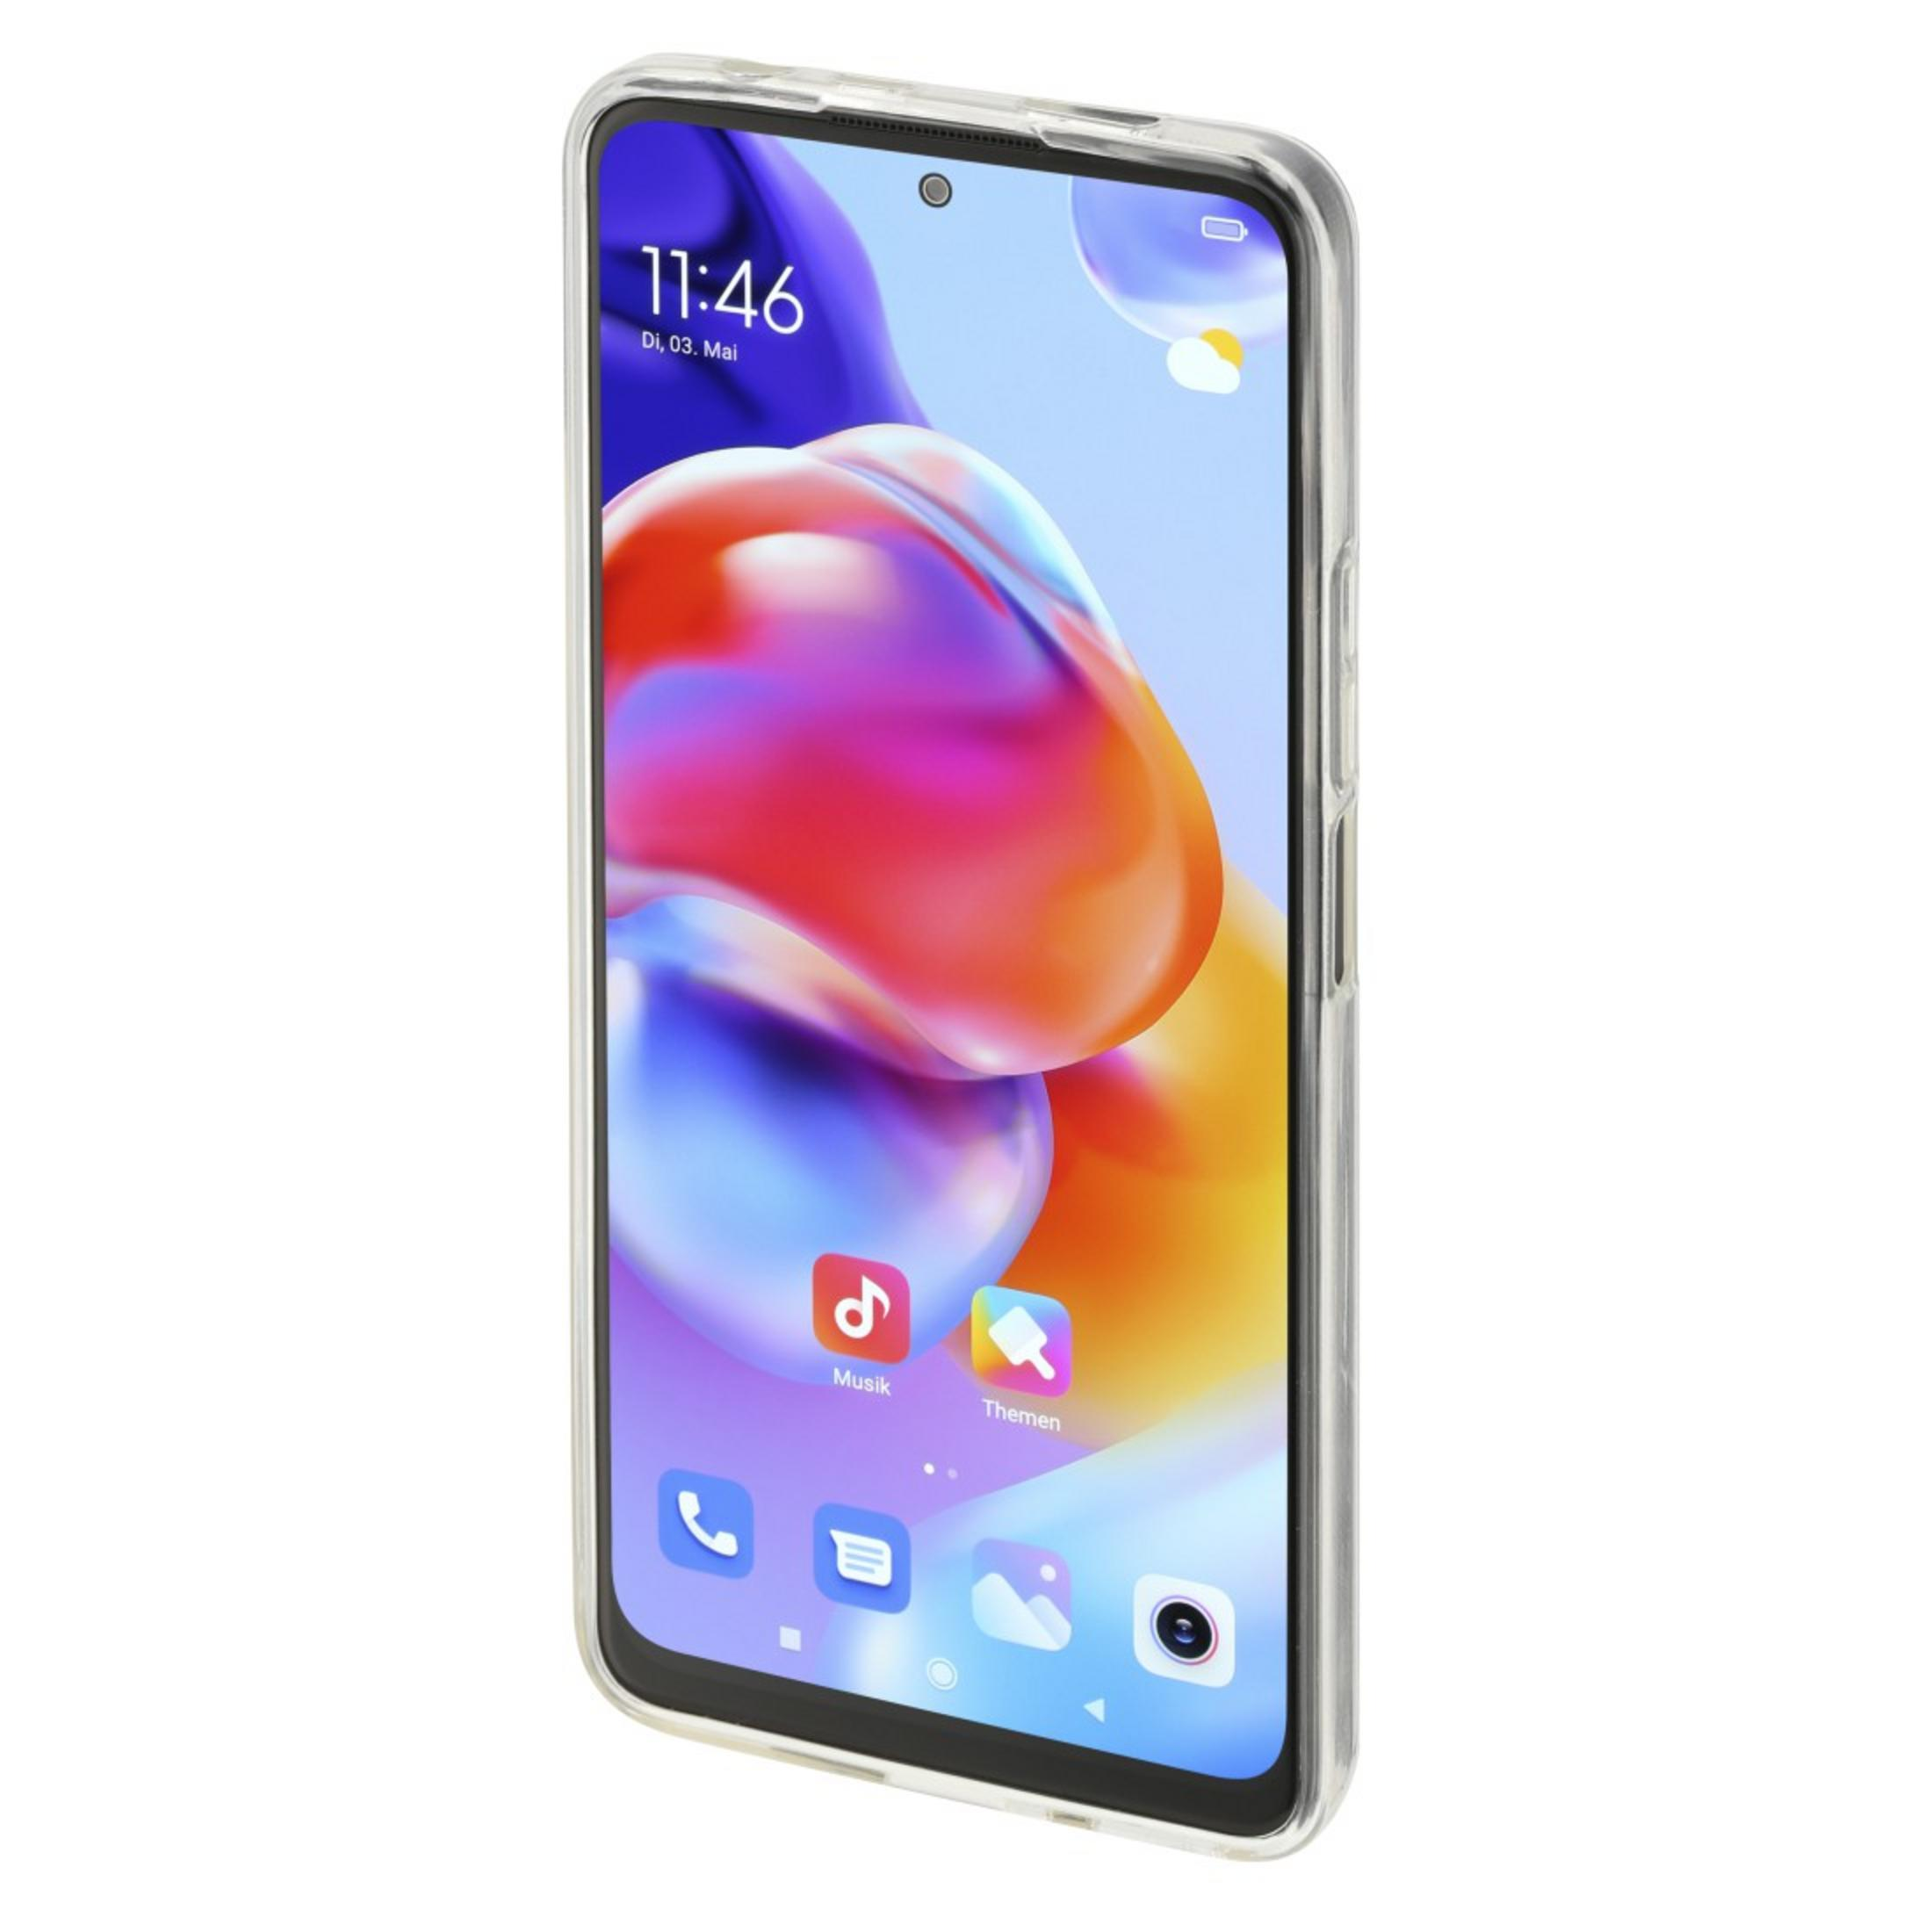 Crystal 5G, Pro+ Redmi Backcover, Xiaomi, HAMA Note 11 Transparent Clear,